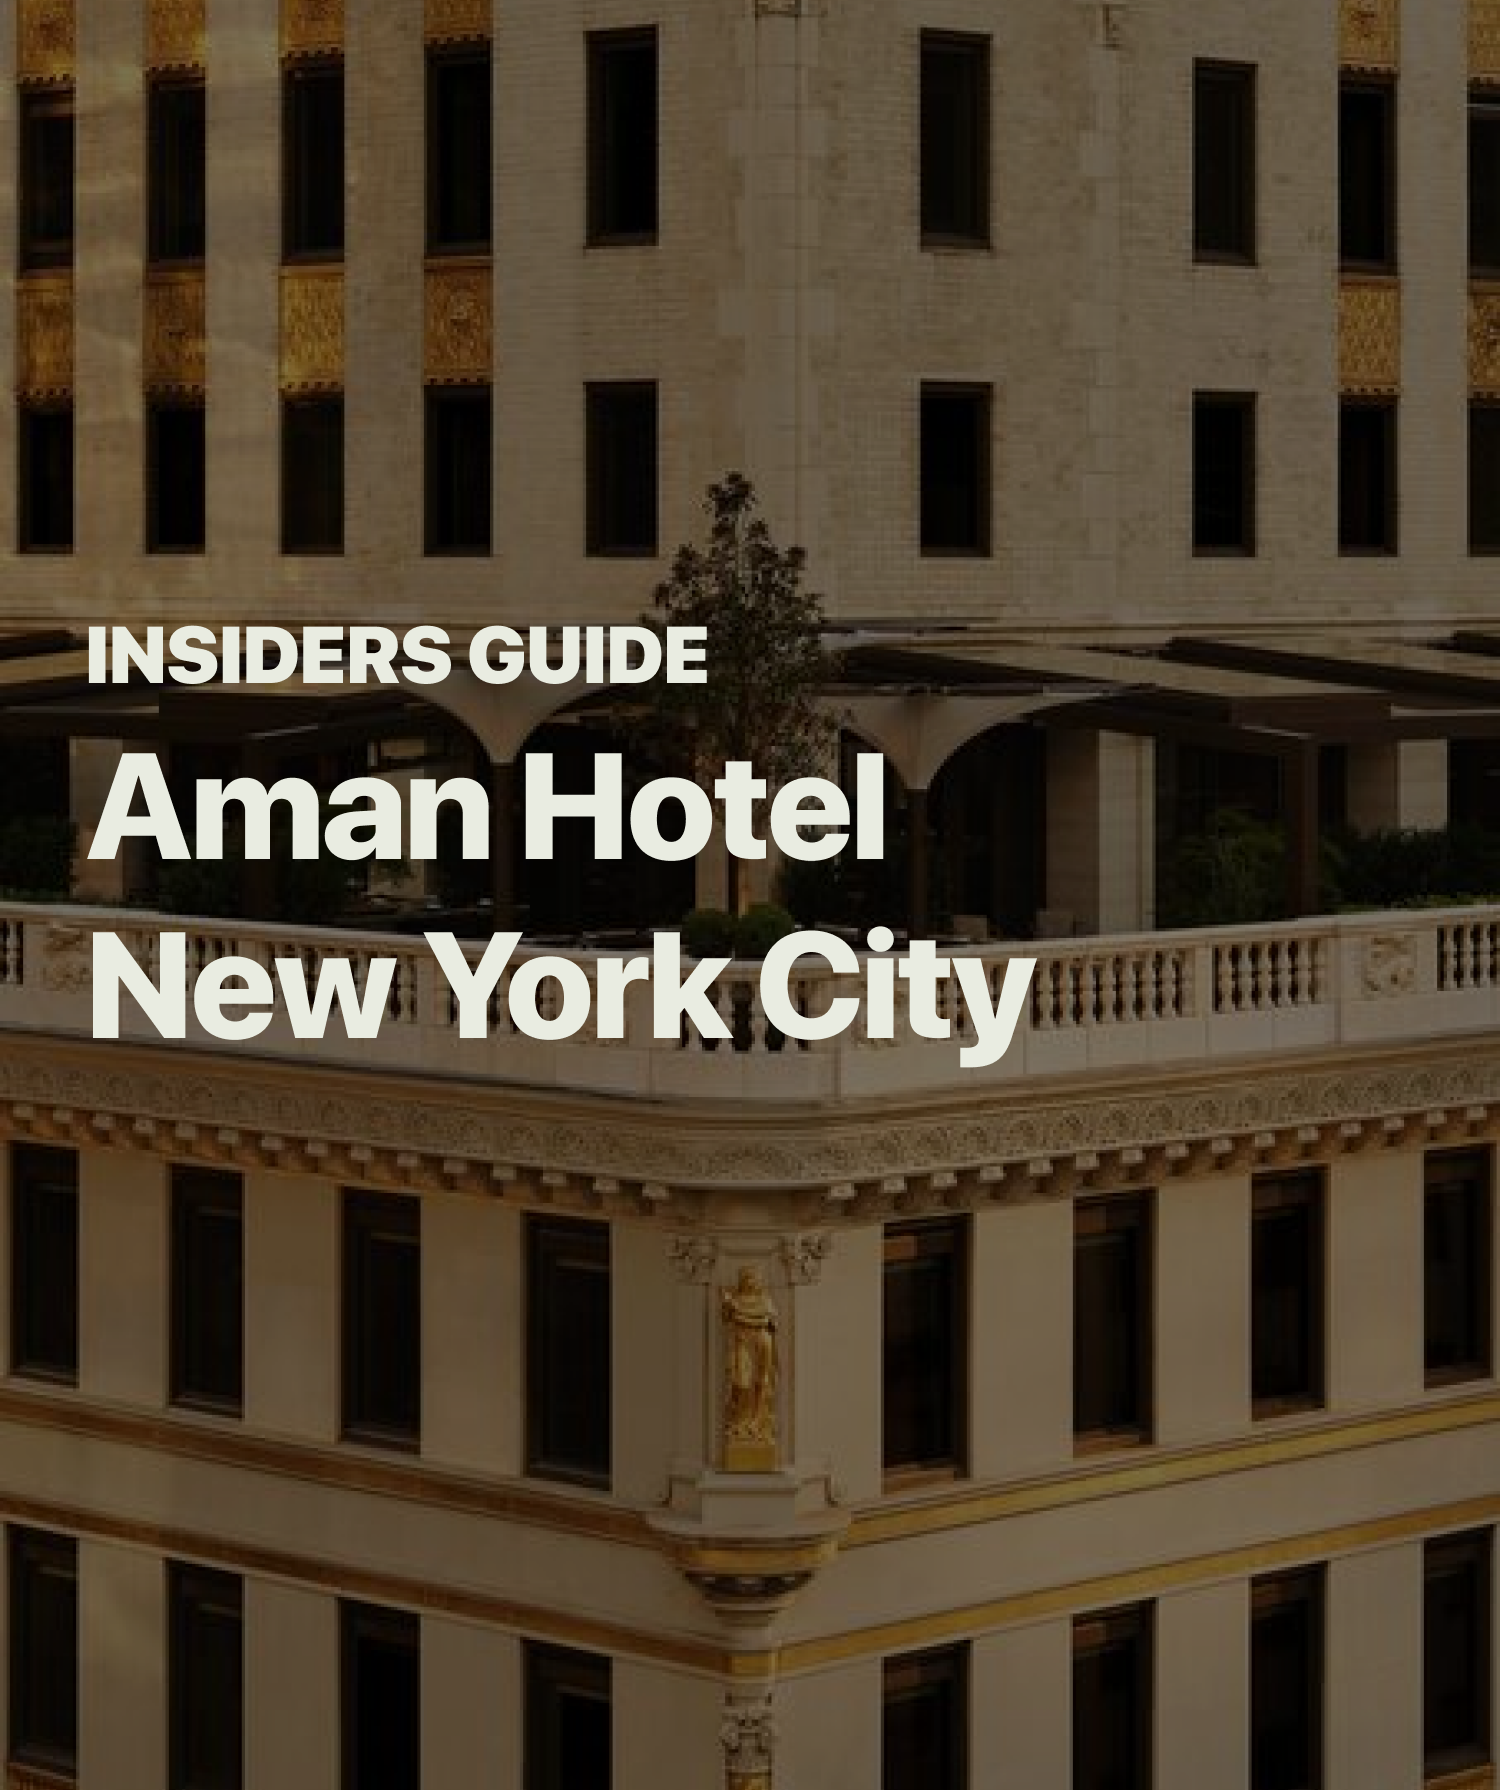 The Aman Hotel New York: Insiders Guide